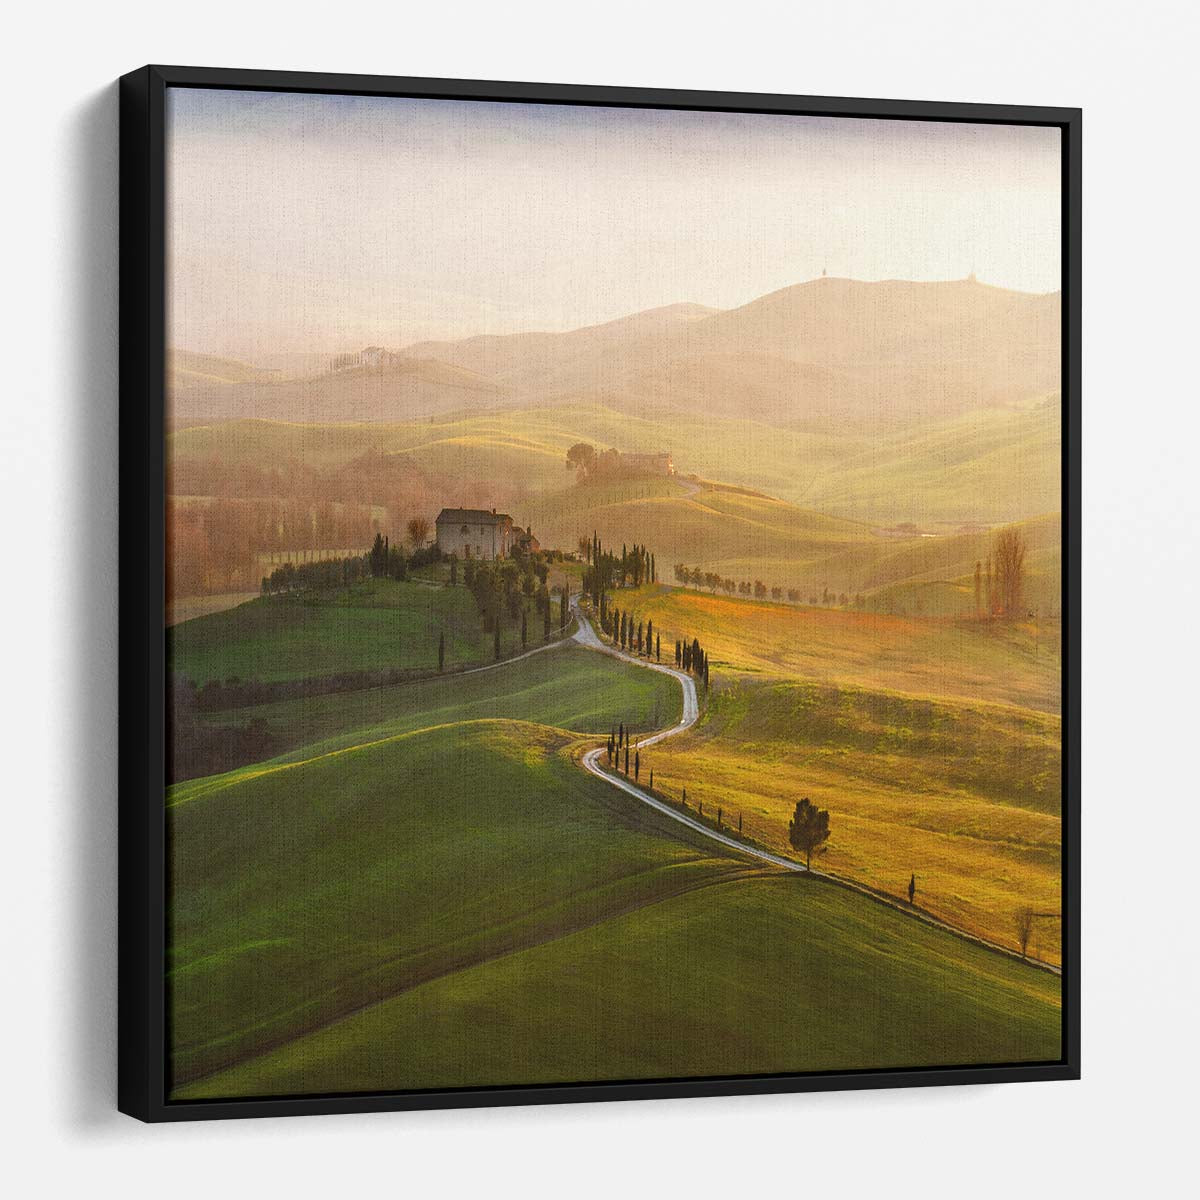 Iconic Tuscany Val d'Orcia Italian Landscape Photography Wall Art by Luxuriance Designs. Made in USA.